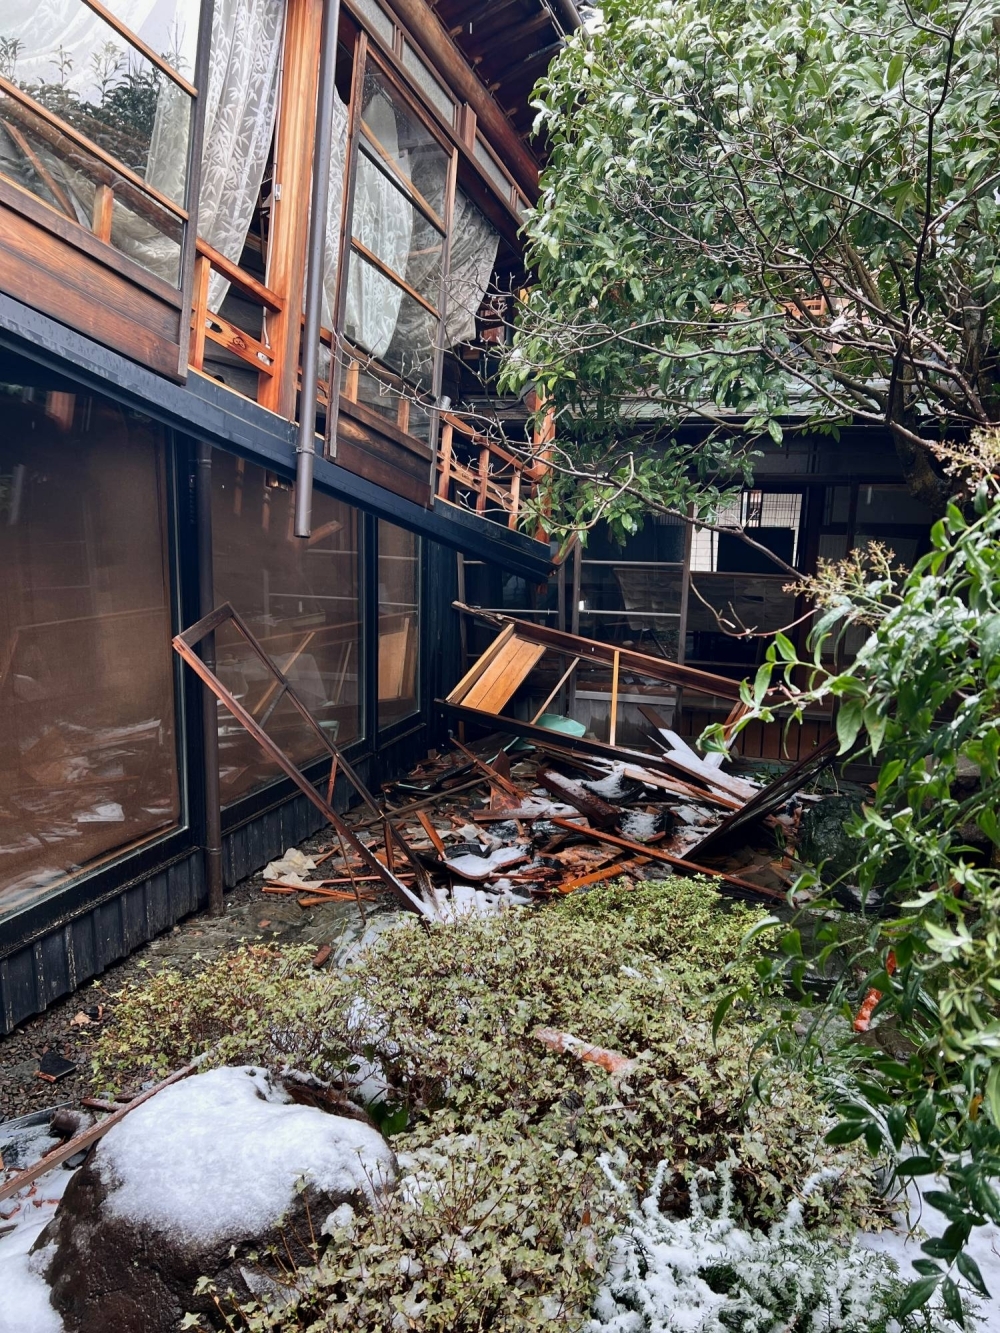 At Ikehata's restaurant, the second floor partially collapsed into the first due to the earthquake.